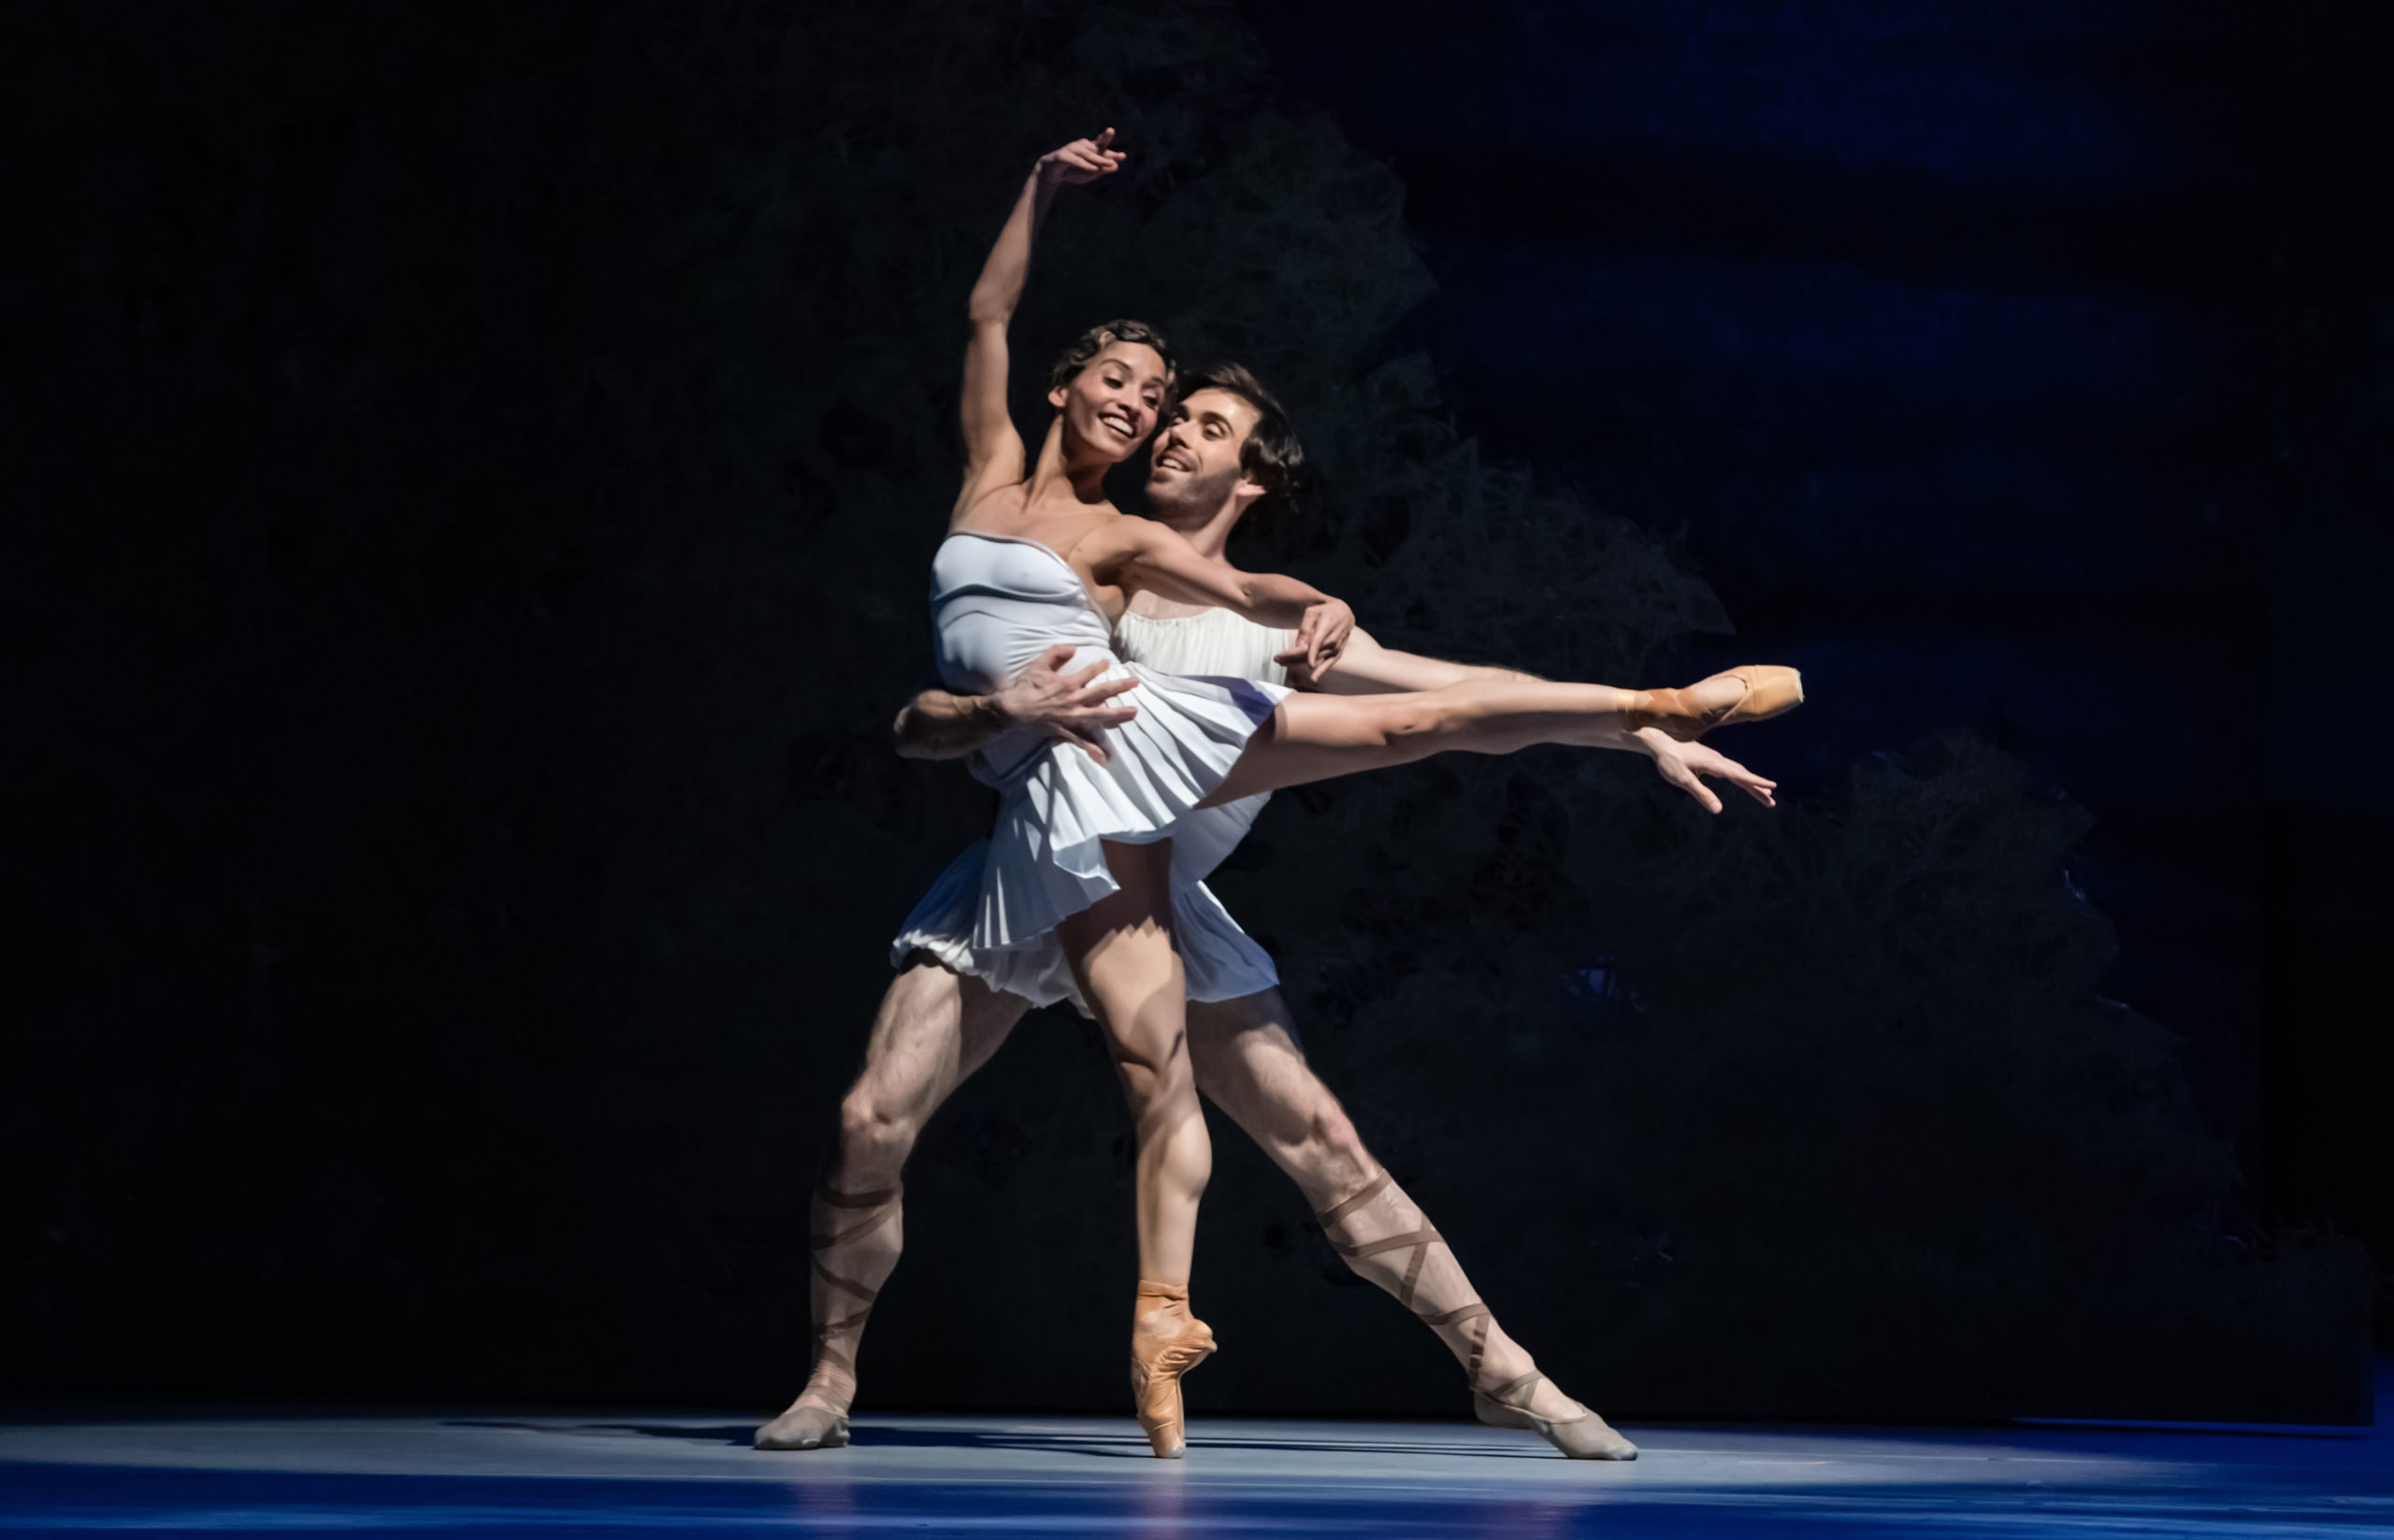 Karina Gonzalez performs a piqué arabesque on her right leg with her right arm high and her left arm held out to the side. She smiles joyfully and looks over her left shoulder towards her partner, Connor Walsh, who holds onto her waist while lunging behind her. Her costume is a short, blue dance dress and tan pointe shoes, while he wears a white toga and brown ballet shoes.